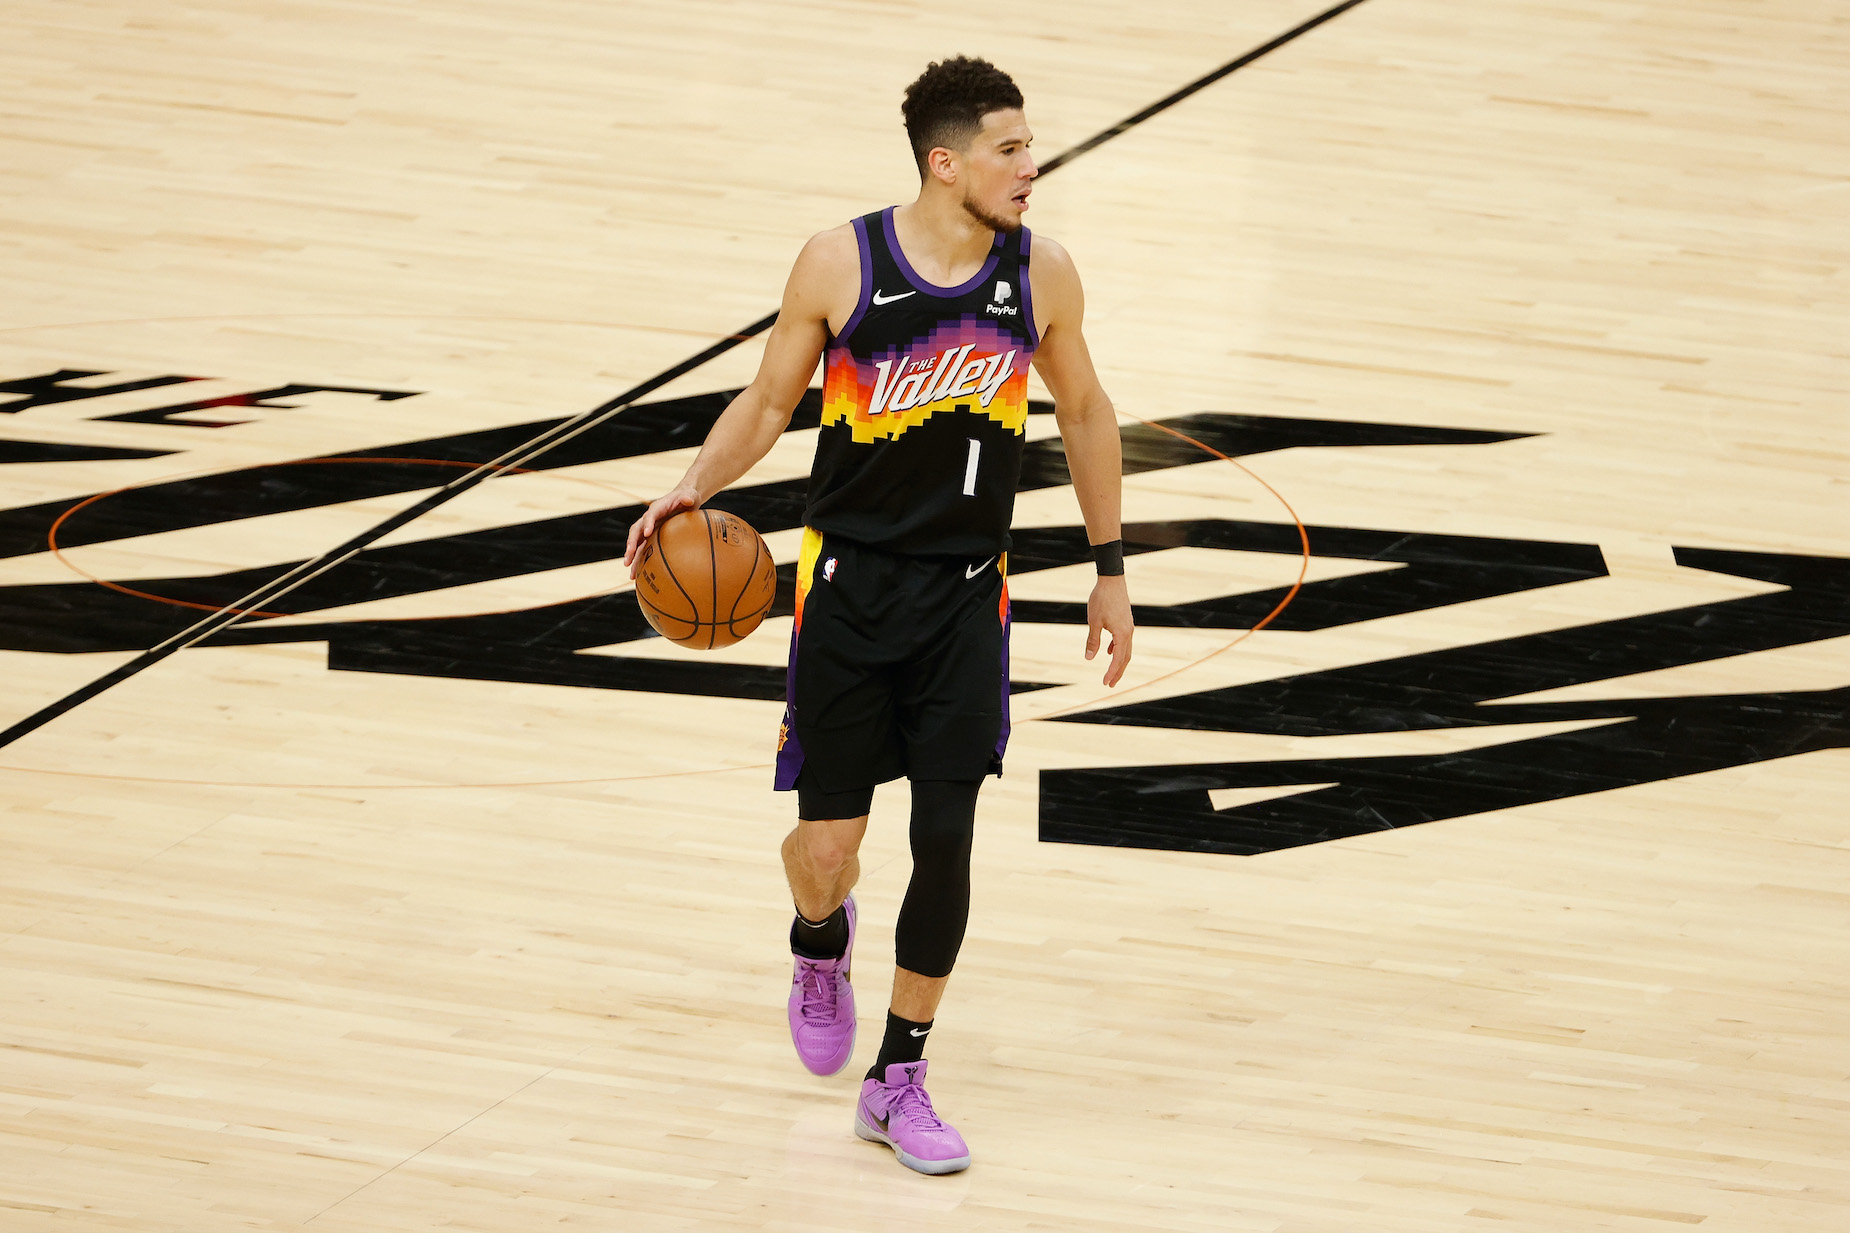 Phoenix Suns guard Devin Booker dribbles the ball during a 2021 NBA playoff game.